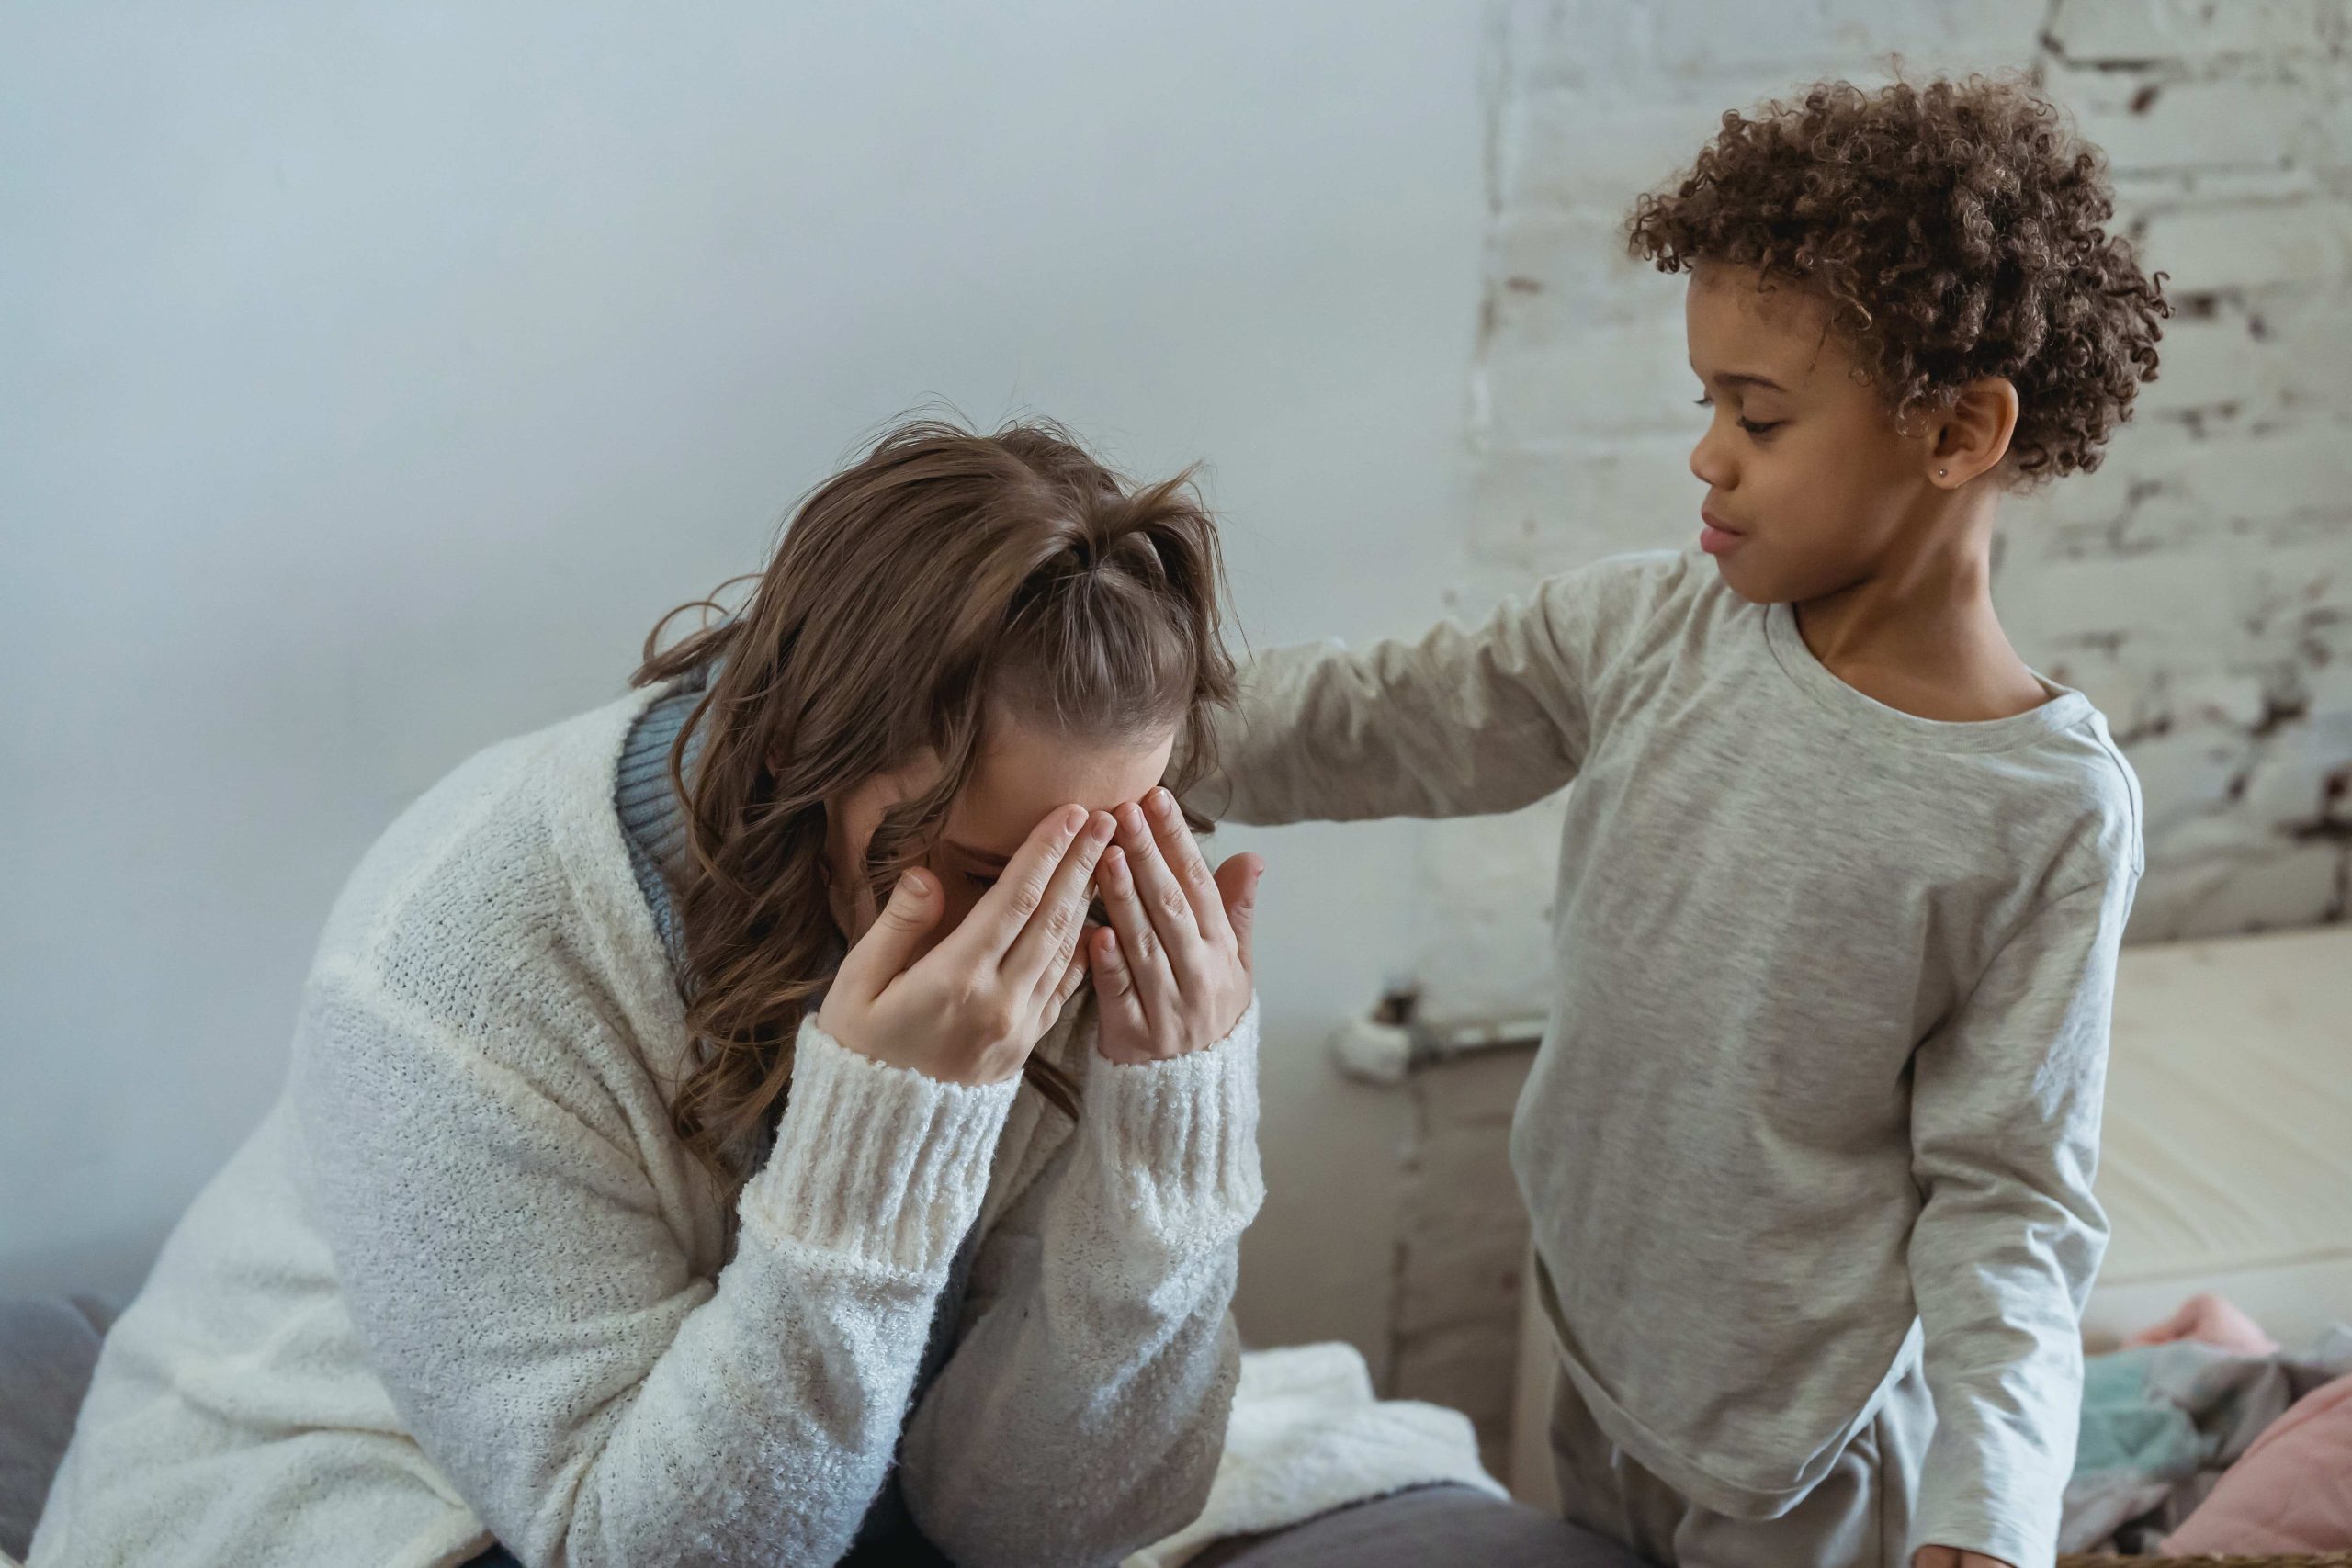 Does Being A Single Mom Make You Depressed And Angry?